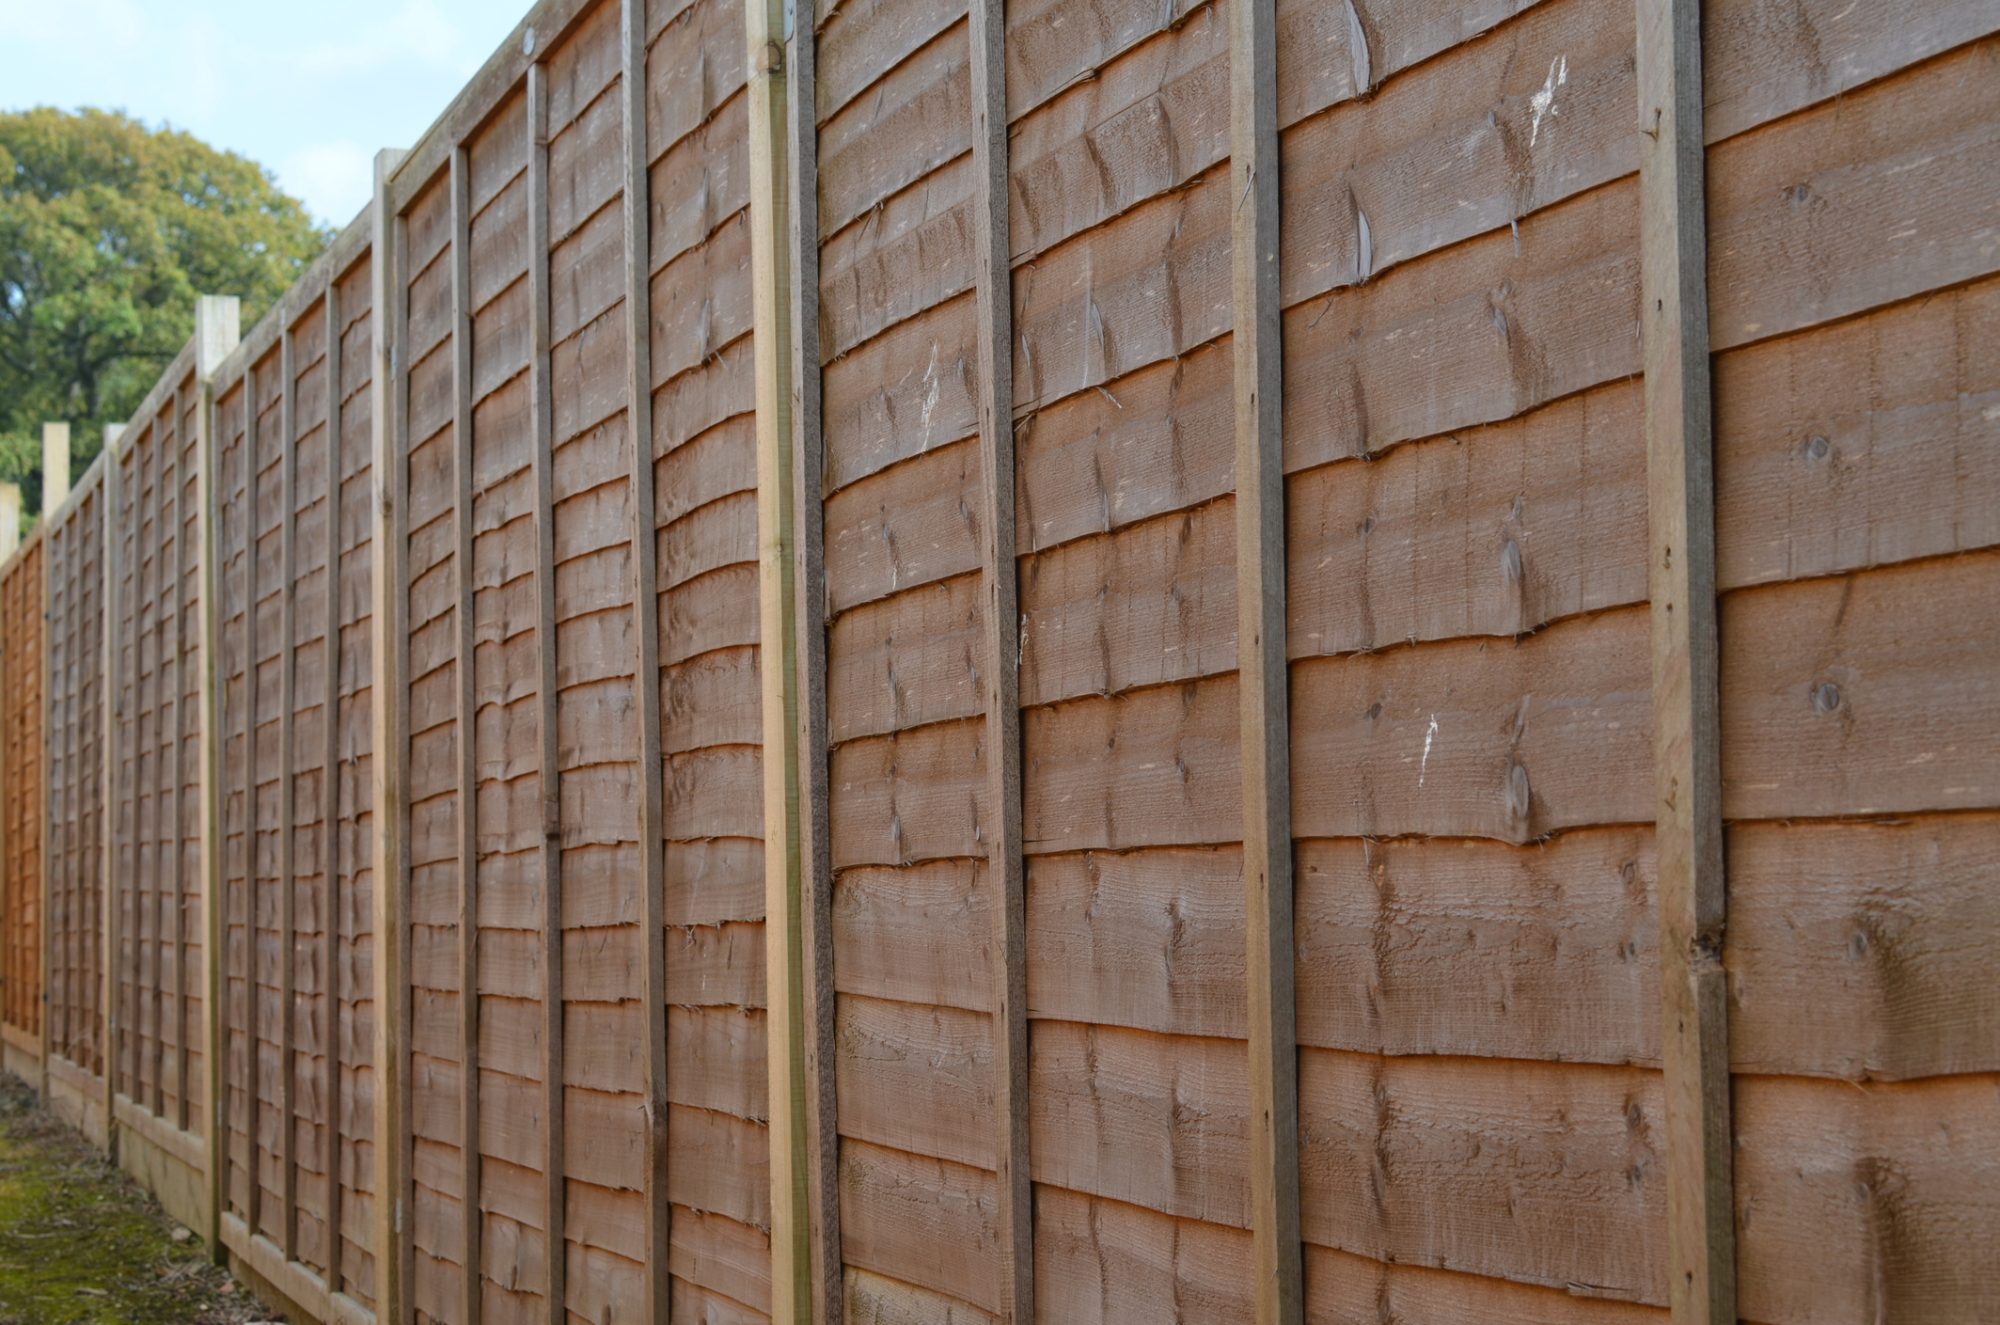 Row of newly erected wooden fence panels.